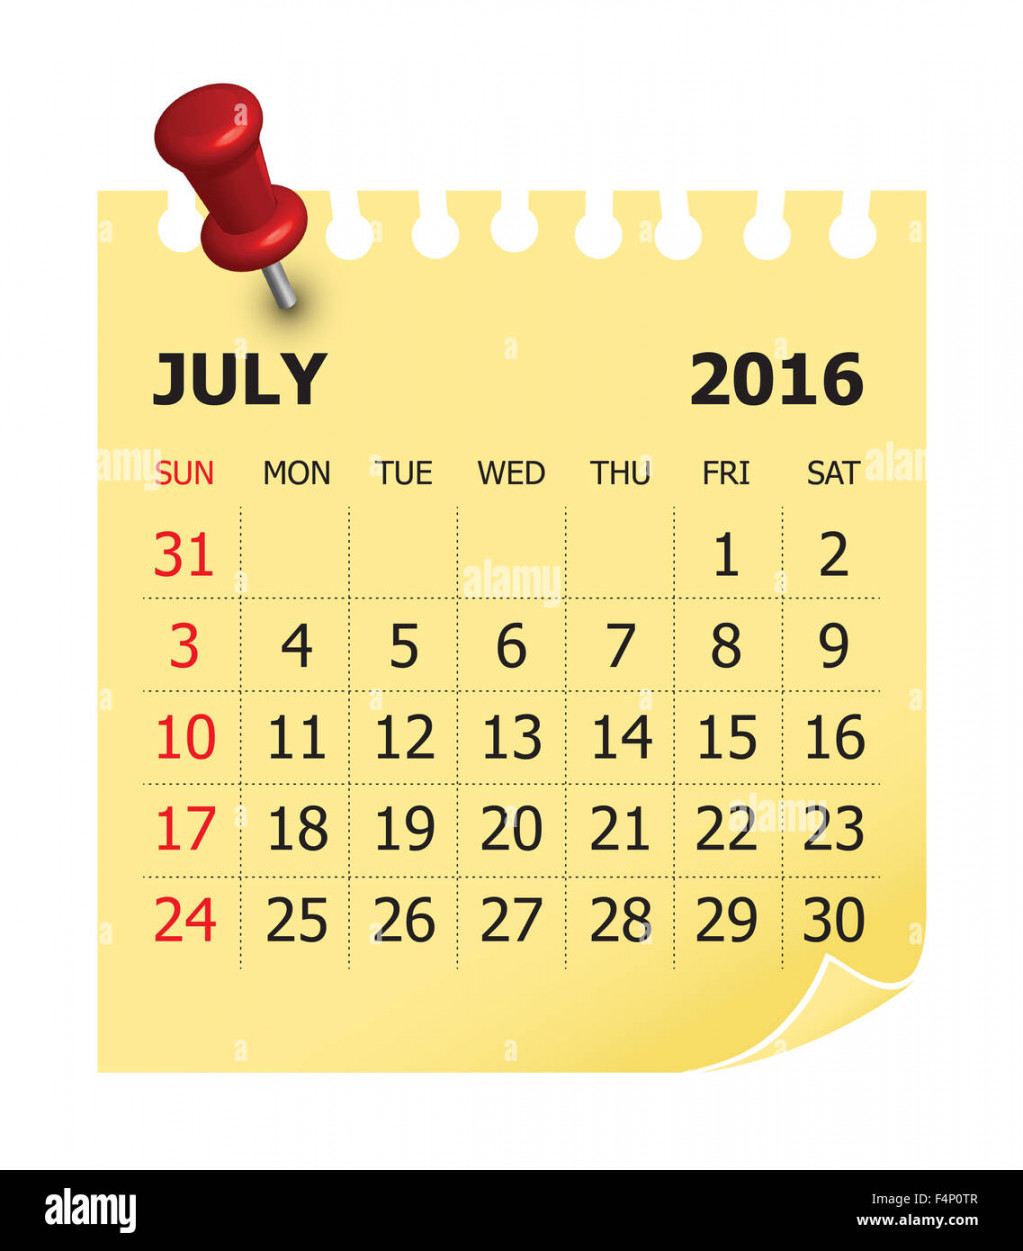 Simple calendar for July  Stock Photo - Alamy